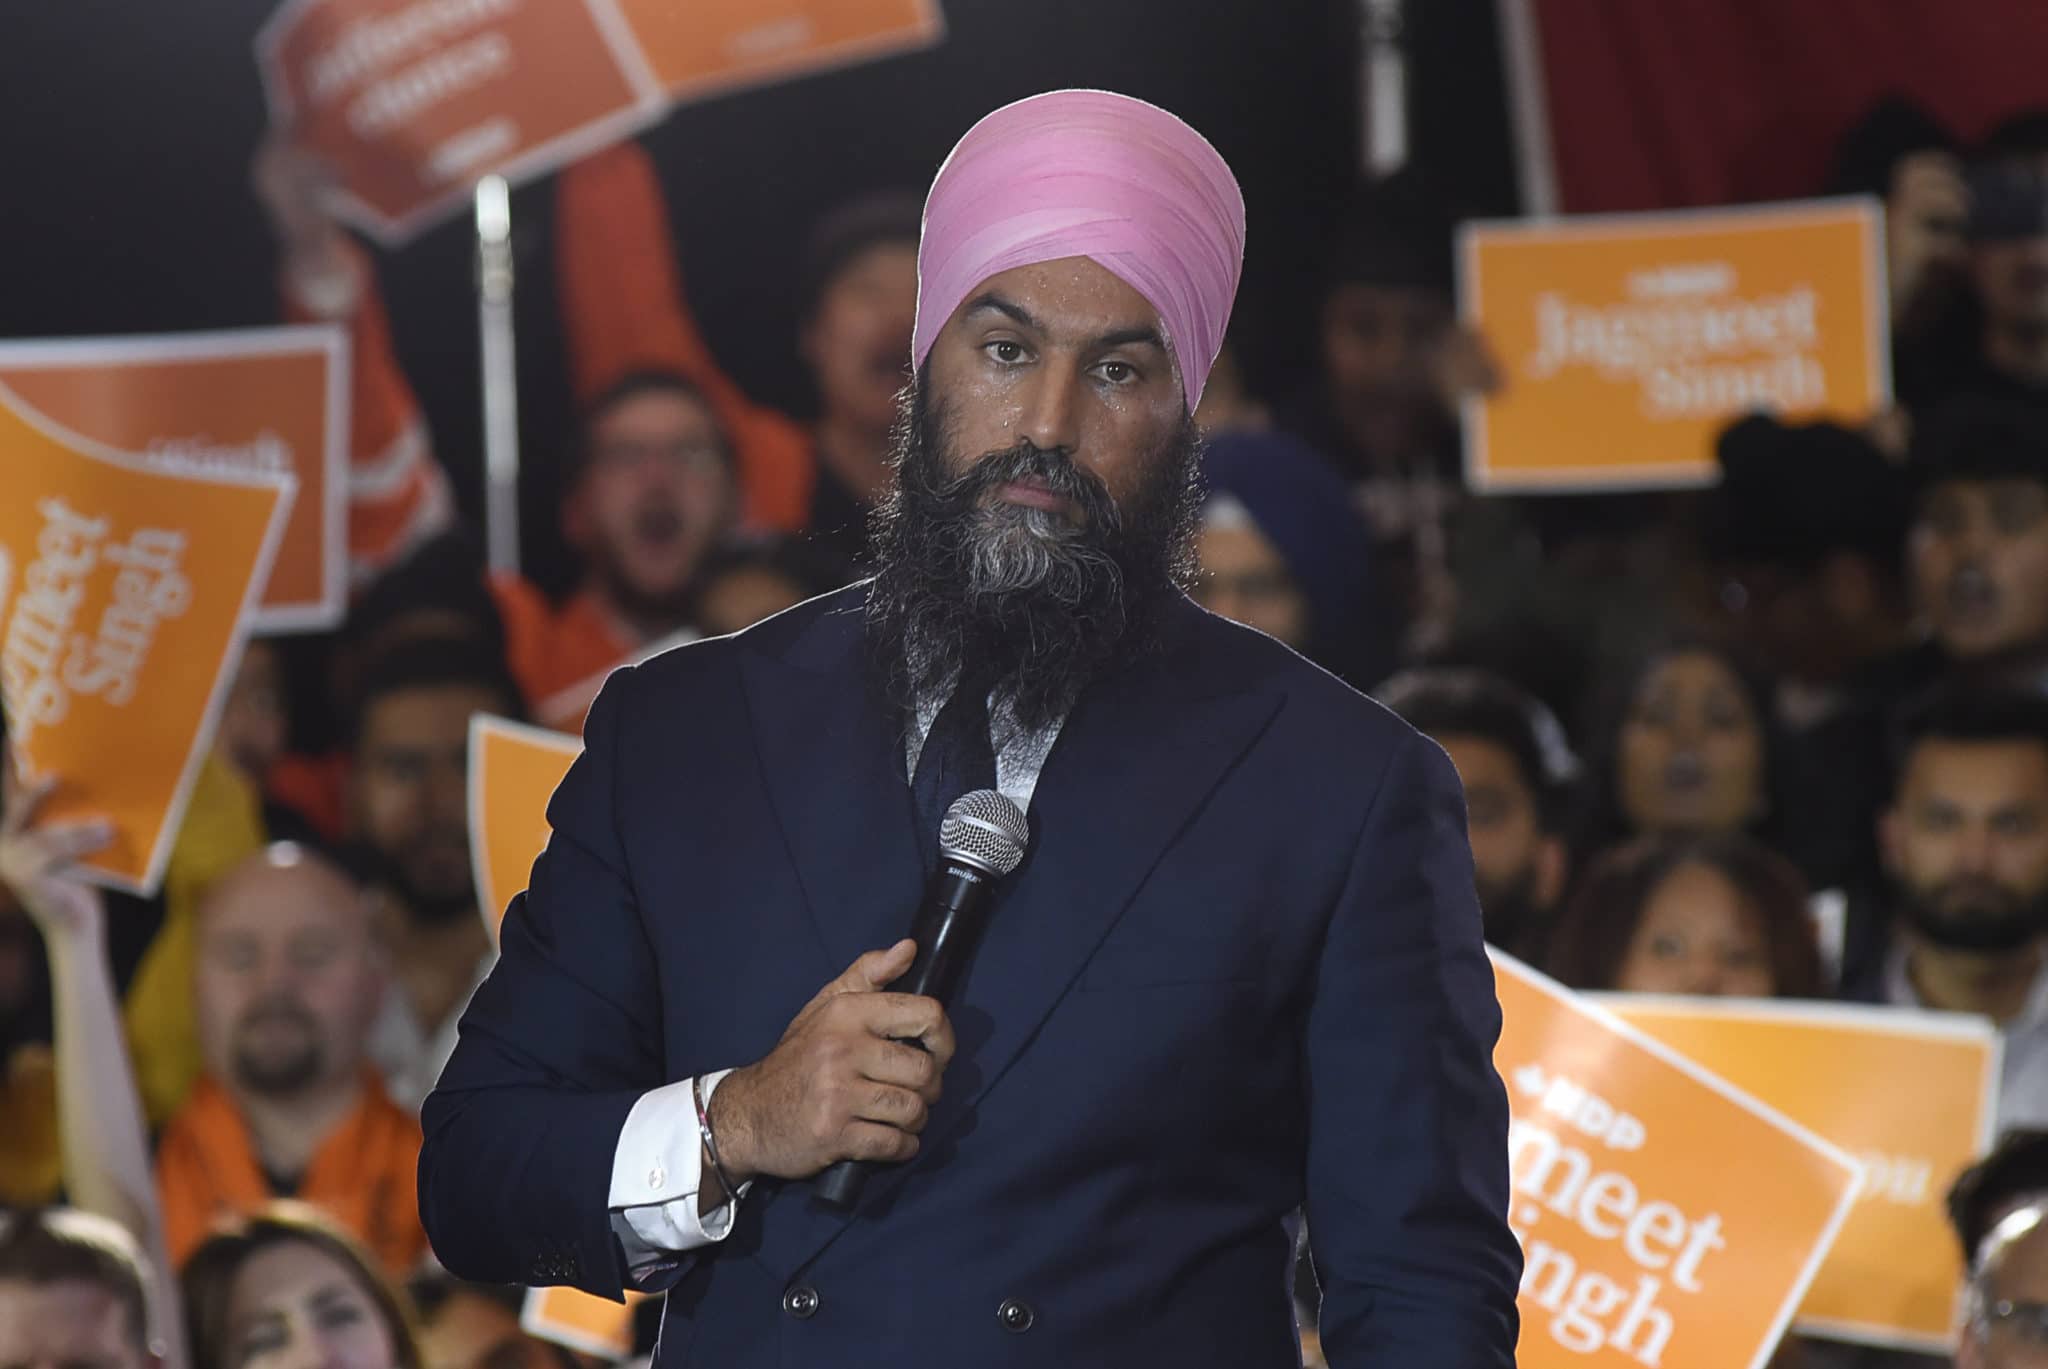 Canada's NDP leader Jagmeet Singh put forward the motion to classify the far-right Proud Boys as a white supremacist terror organisation. 